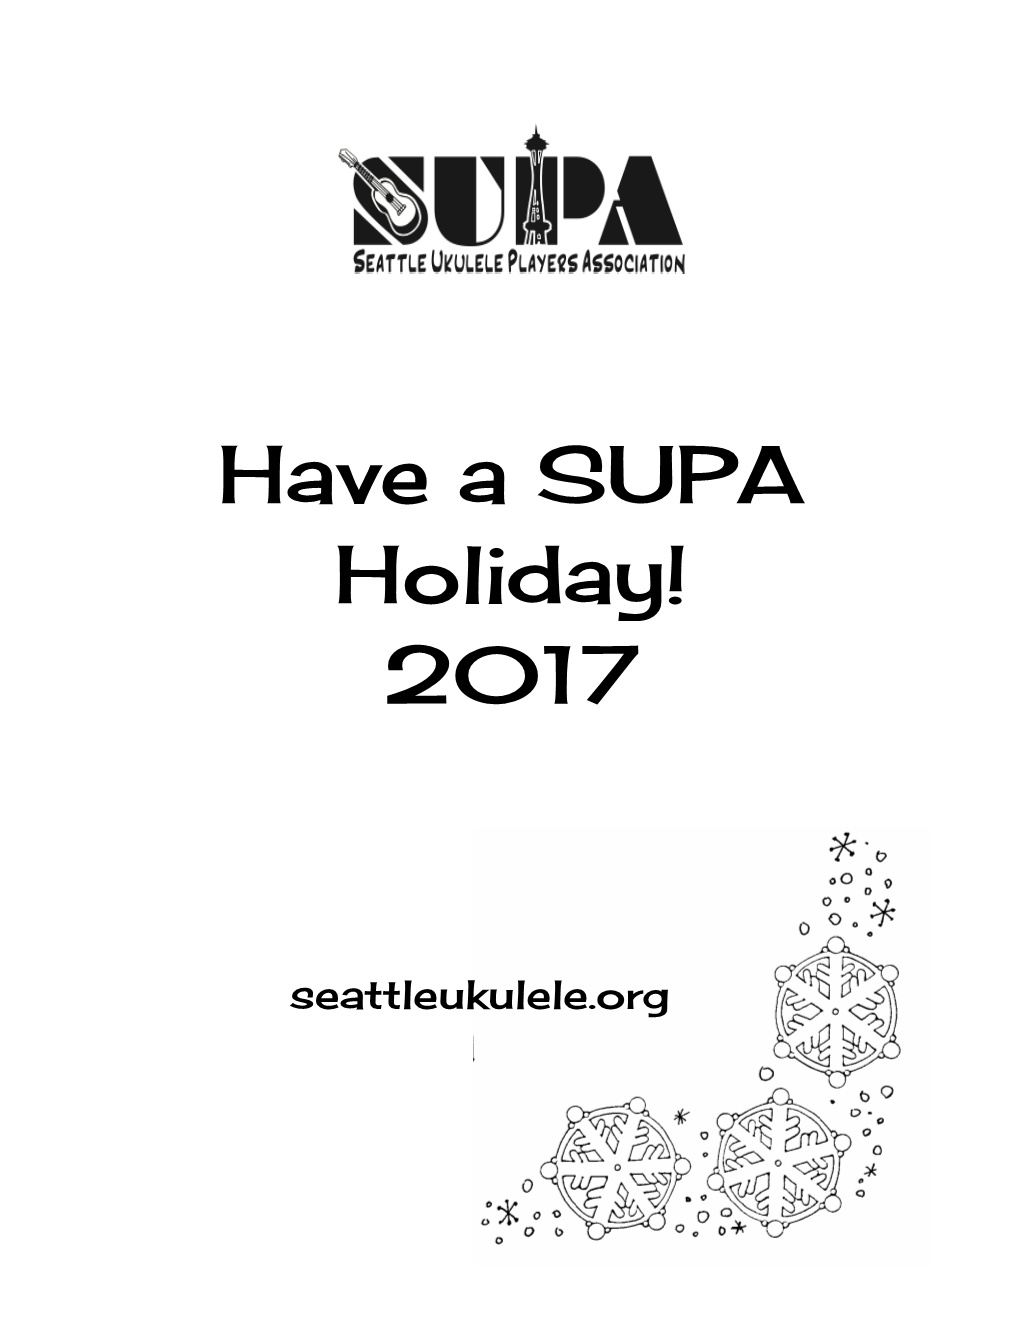 Have a SUPA Holiday! 2017